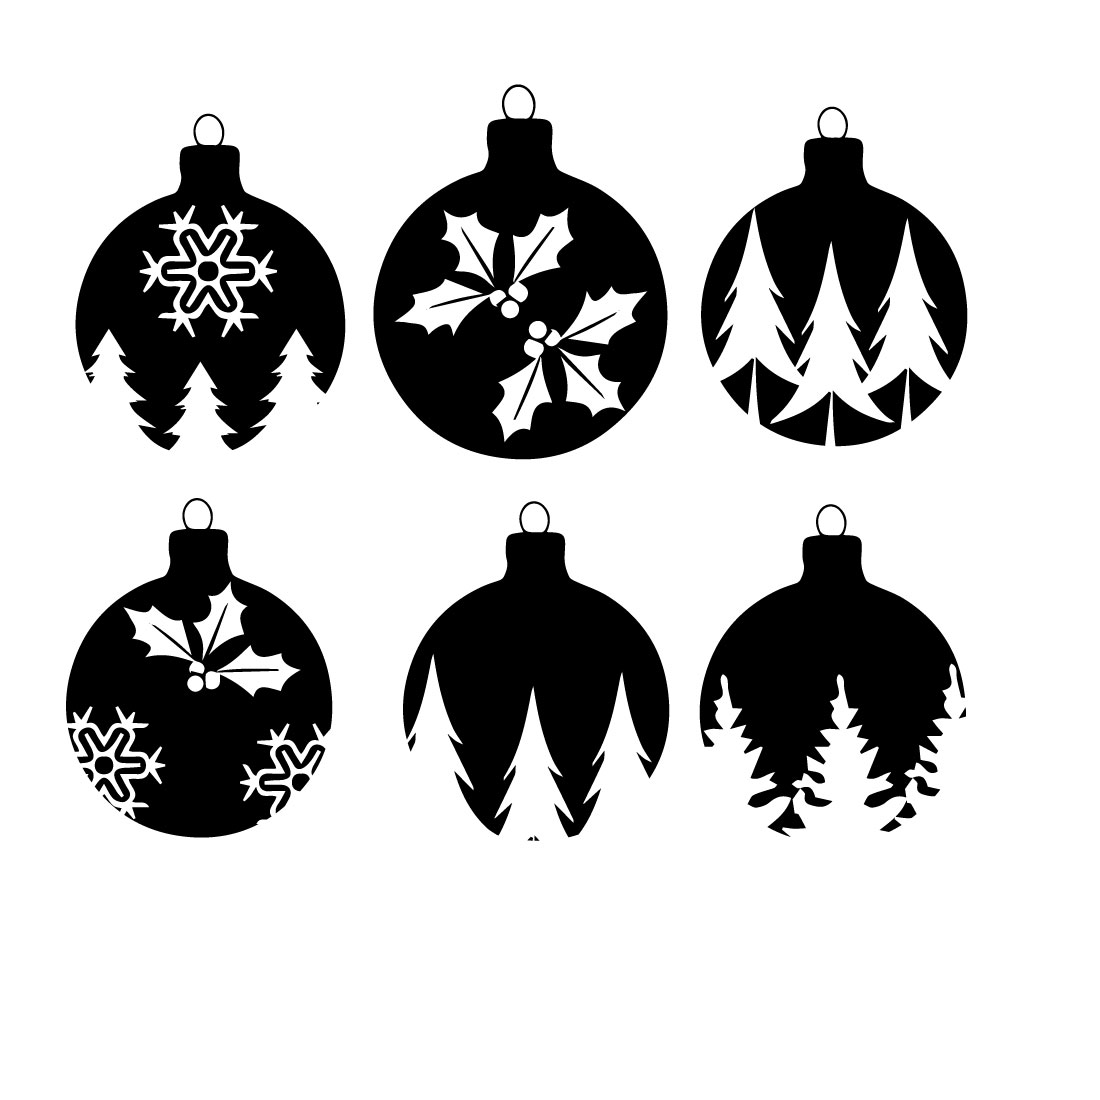 Pack of black irresistible images of Christmas decorations in the shape of a ball